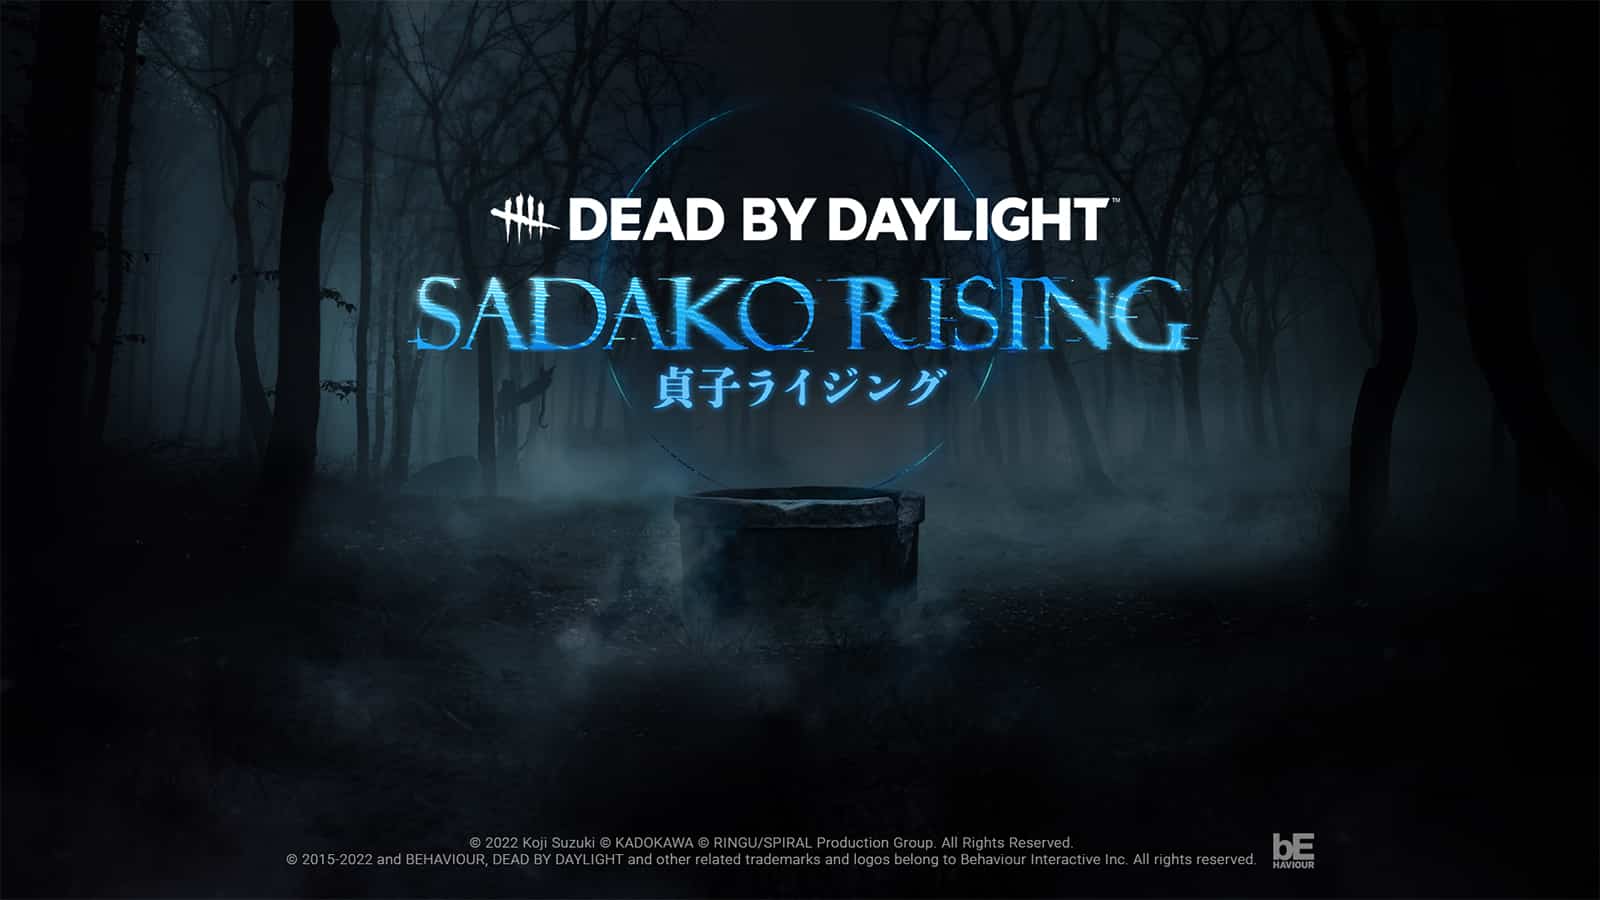 Official artwork for the new Dead by Daylight chapter, Sadako Rising